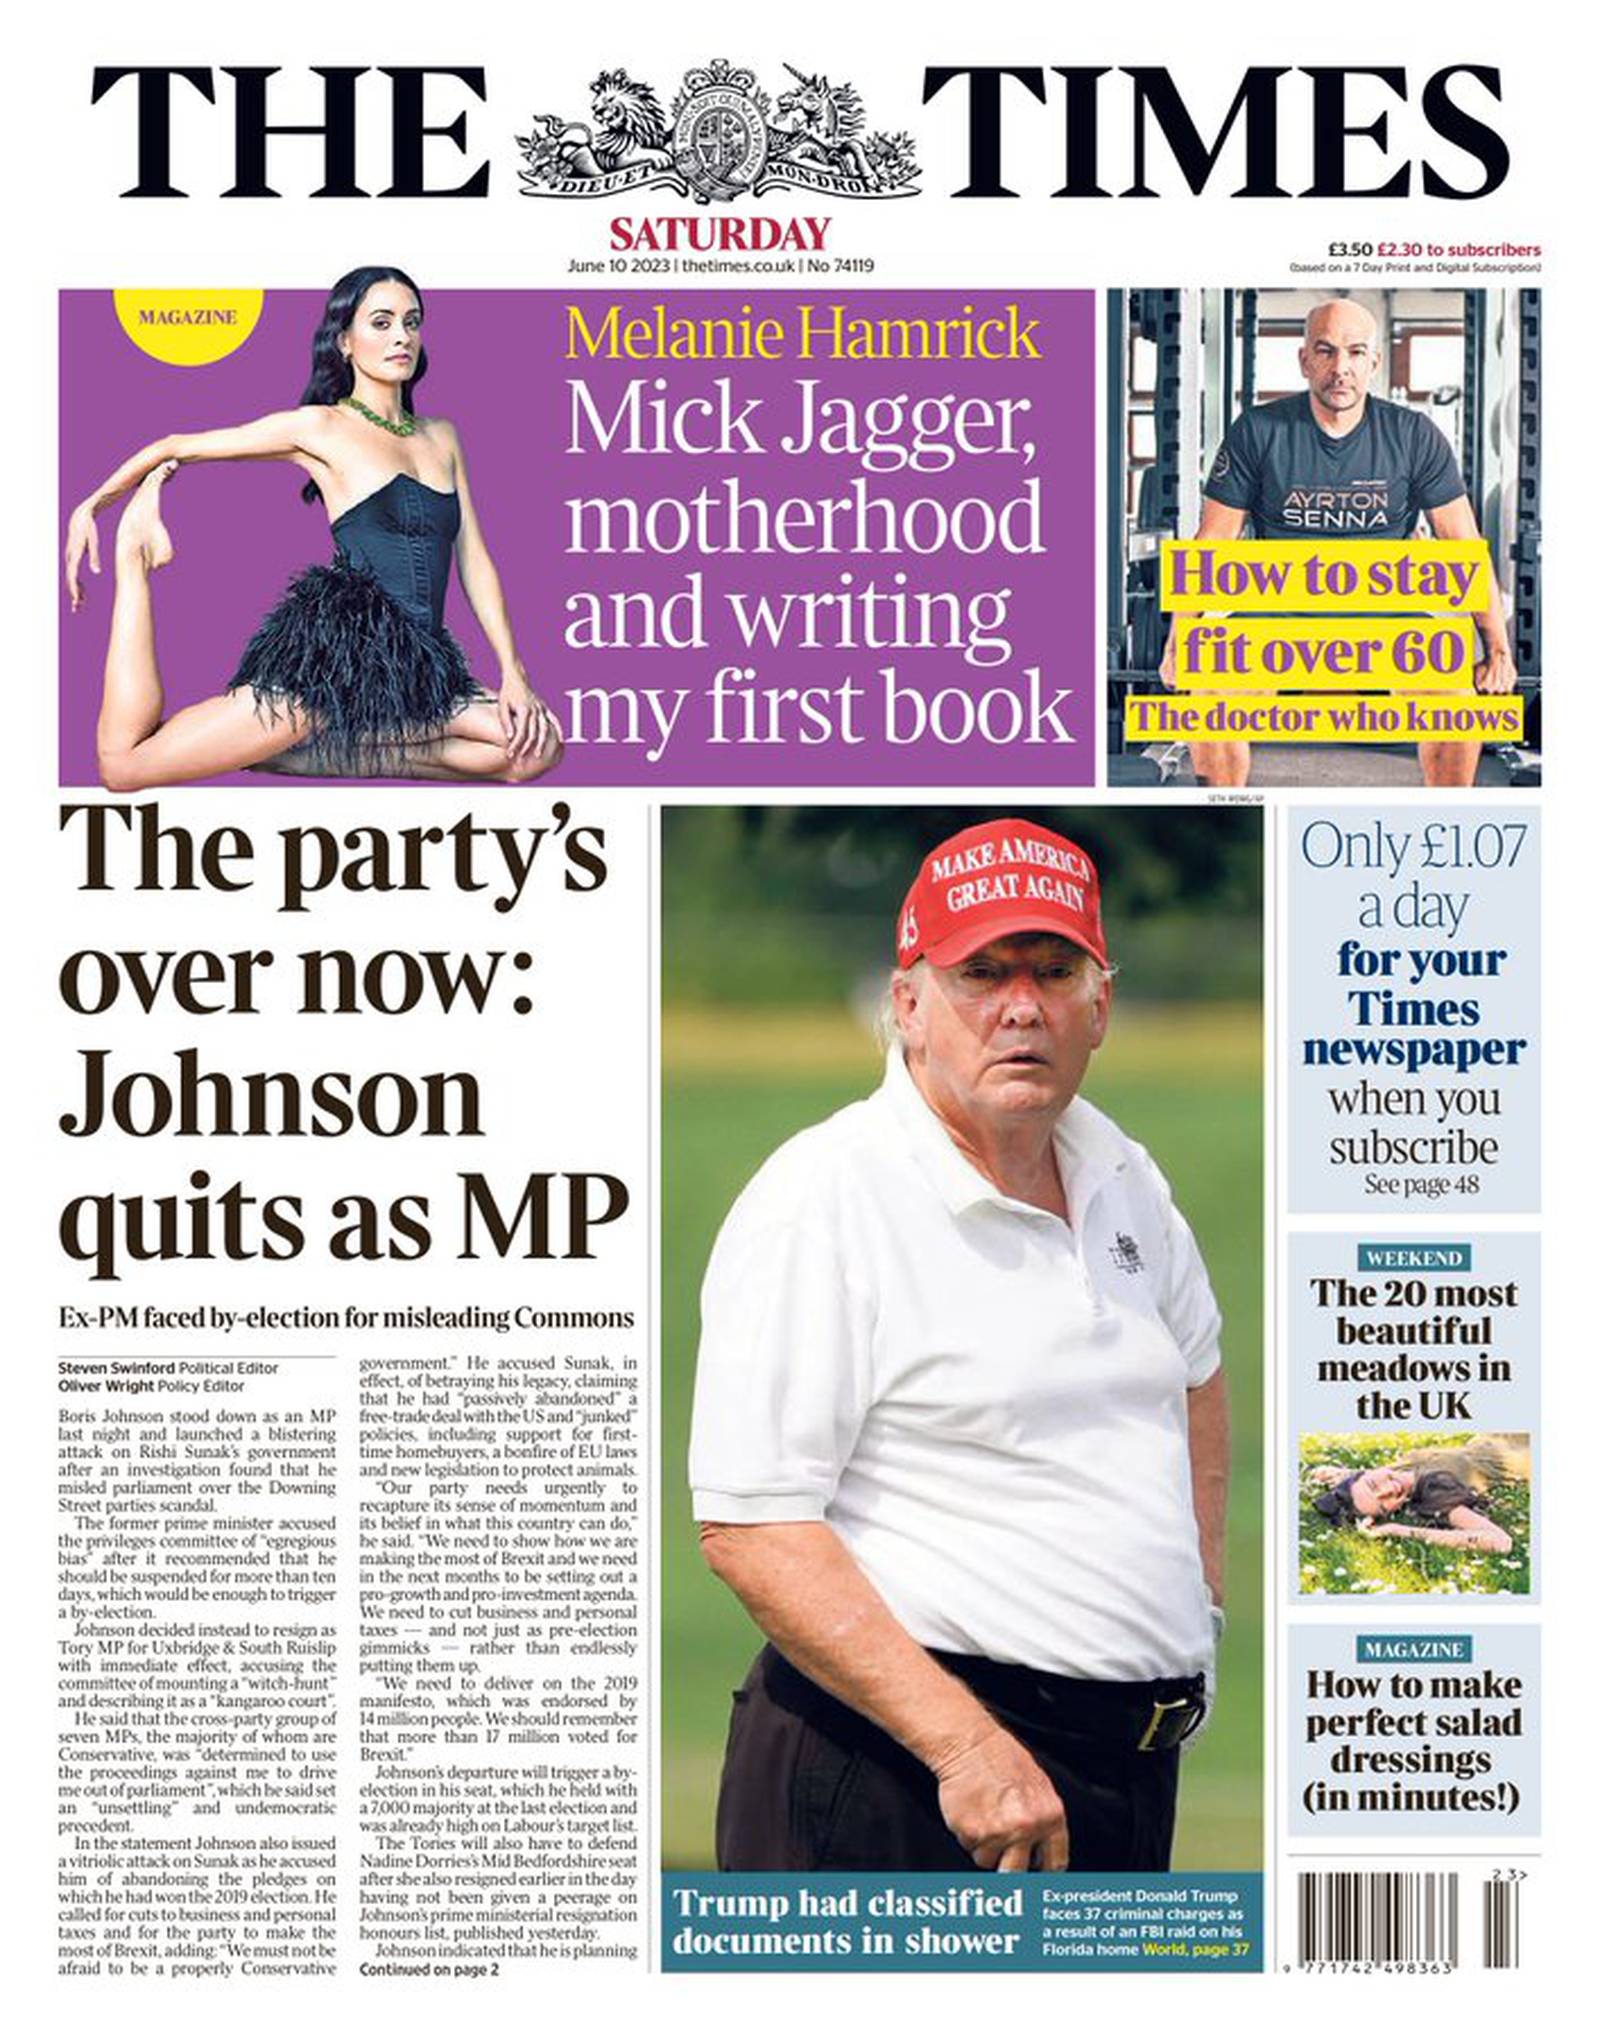 The Times newspaper, June 10 2023, on Boris Johnson quitting as MP